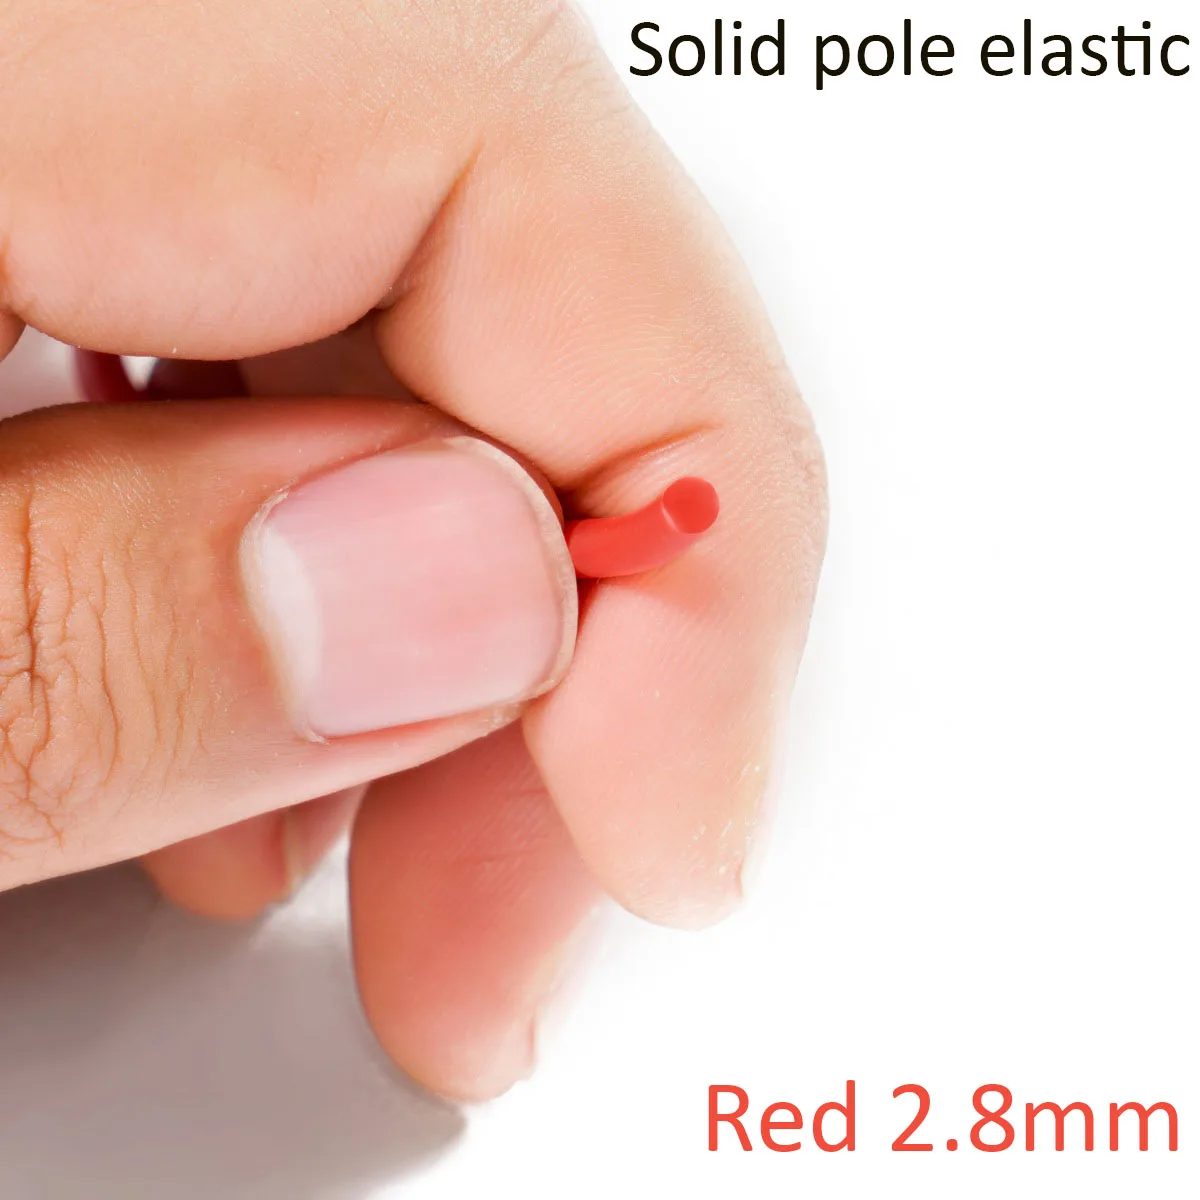 New 3m/6m/10m/20/50m Solid Core Pole Elastic Red Diameter 2.8mm Fishing Lines Latex Tube Retention Rope Fishing Tackles